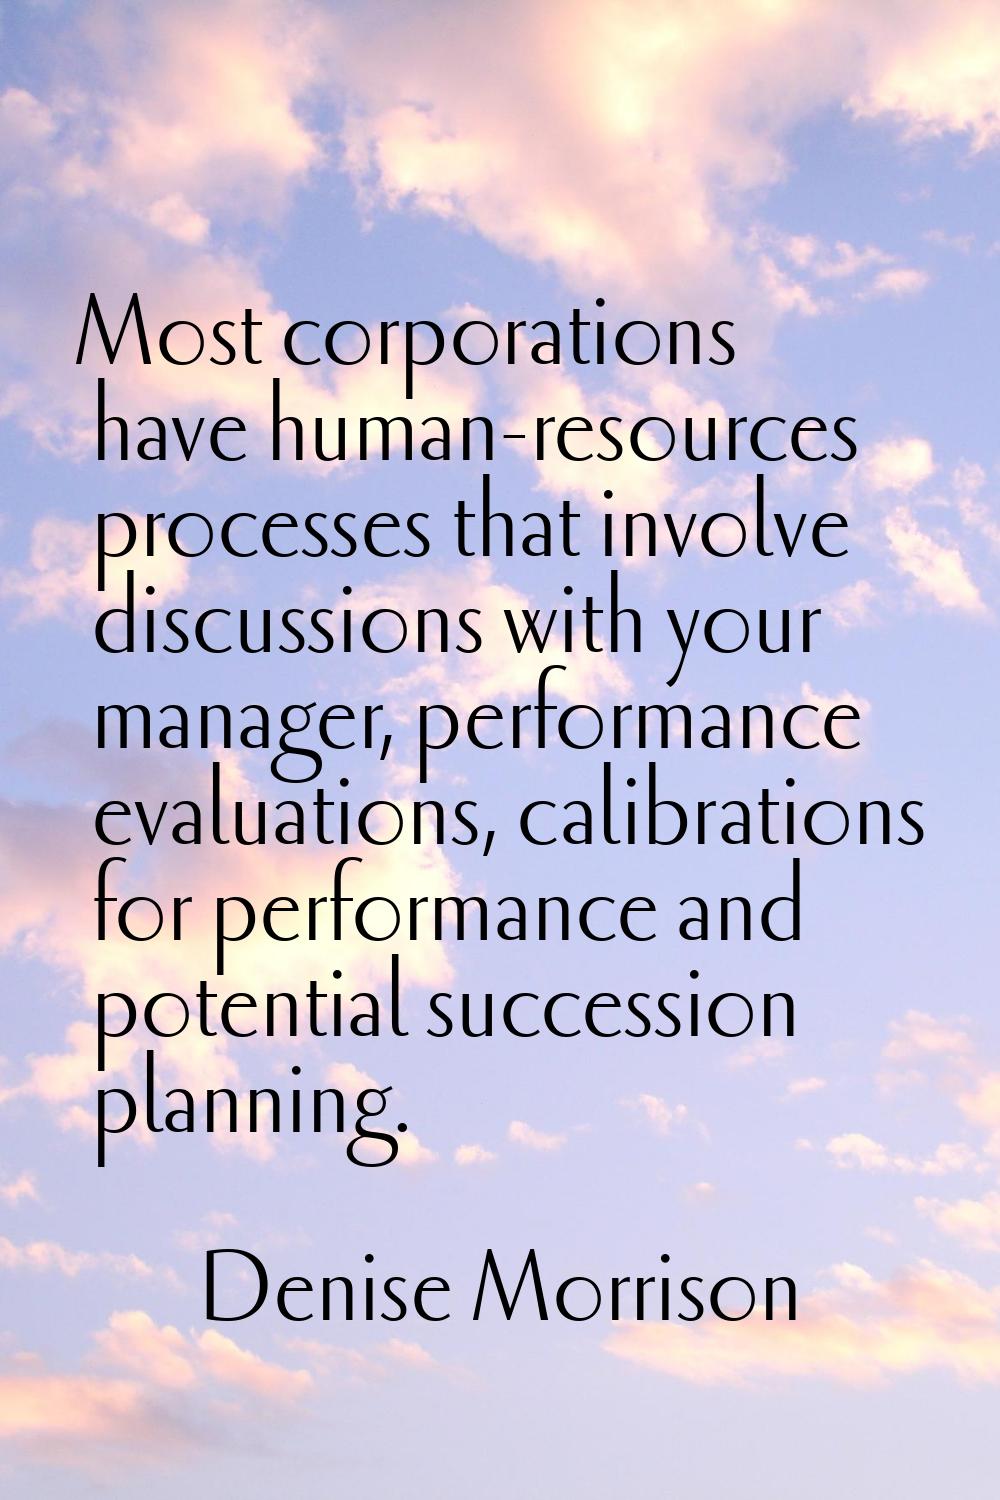 Most corporations have human-resources processes that involve discussions with your manager, perfor